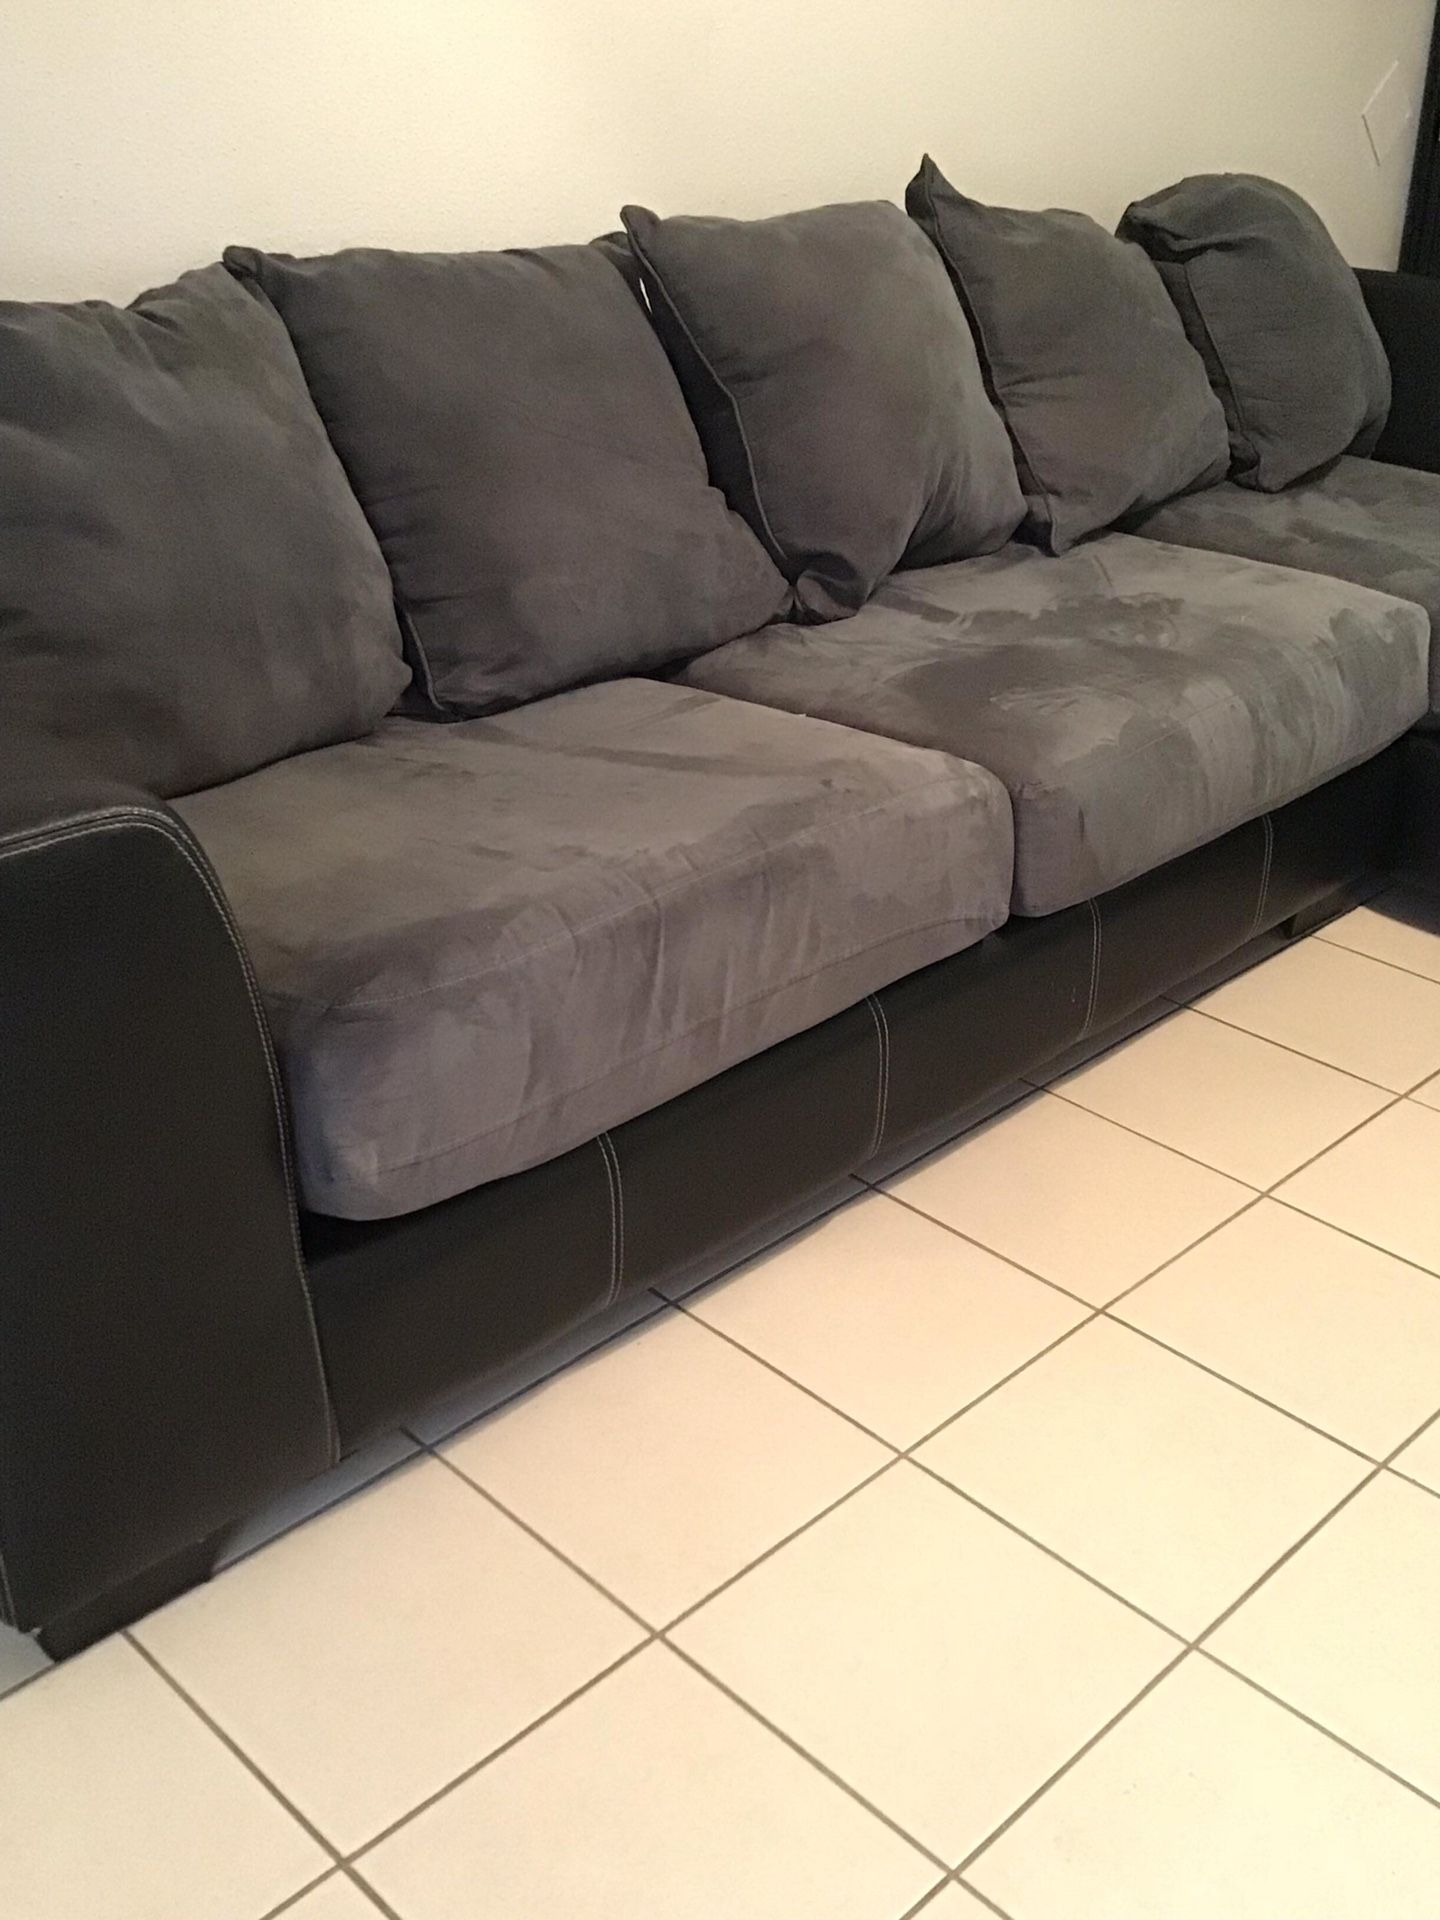 Selling my use couch Negotiate a price with me